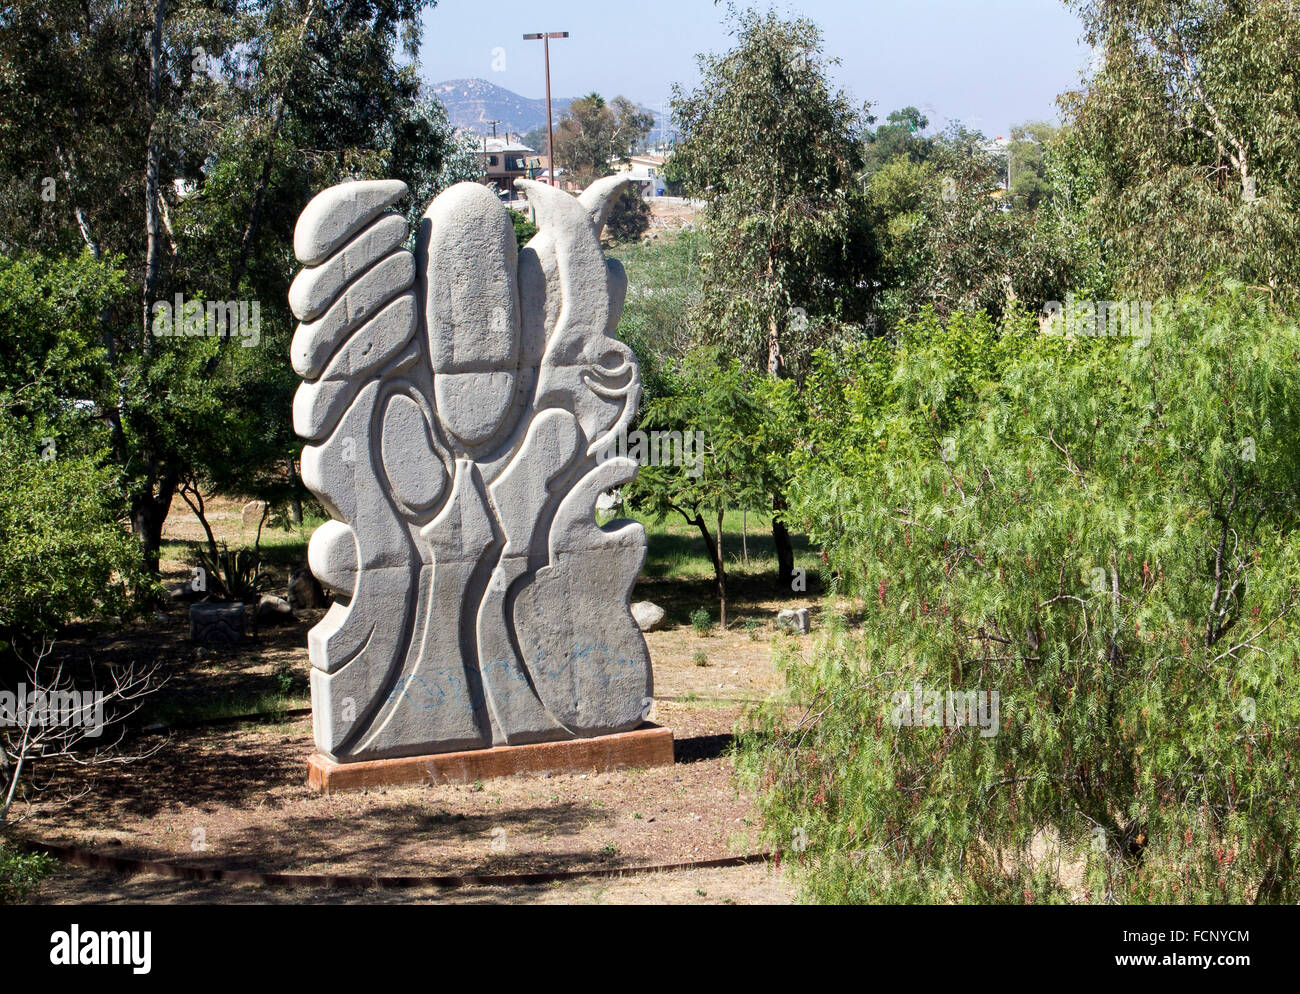 large sculpture in Tecate, Mexico Stock Photo